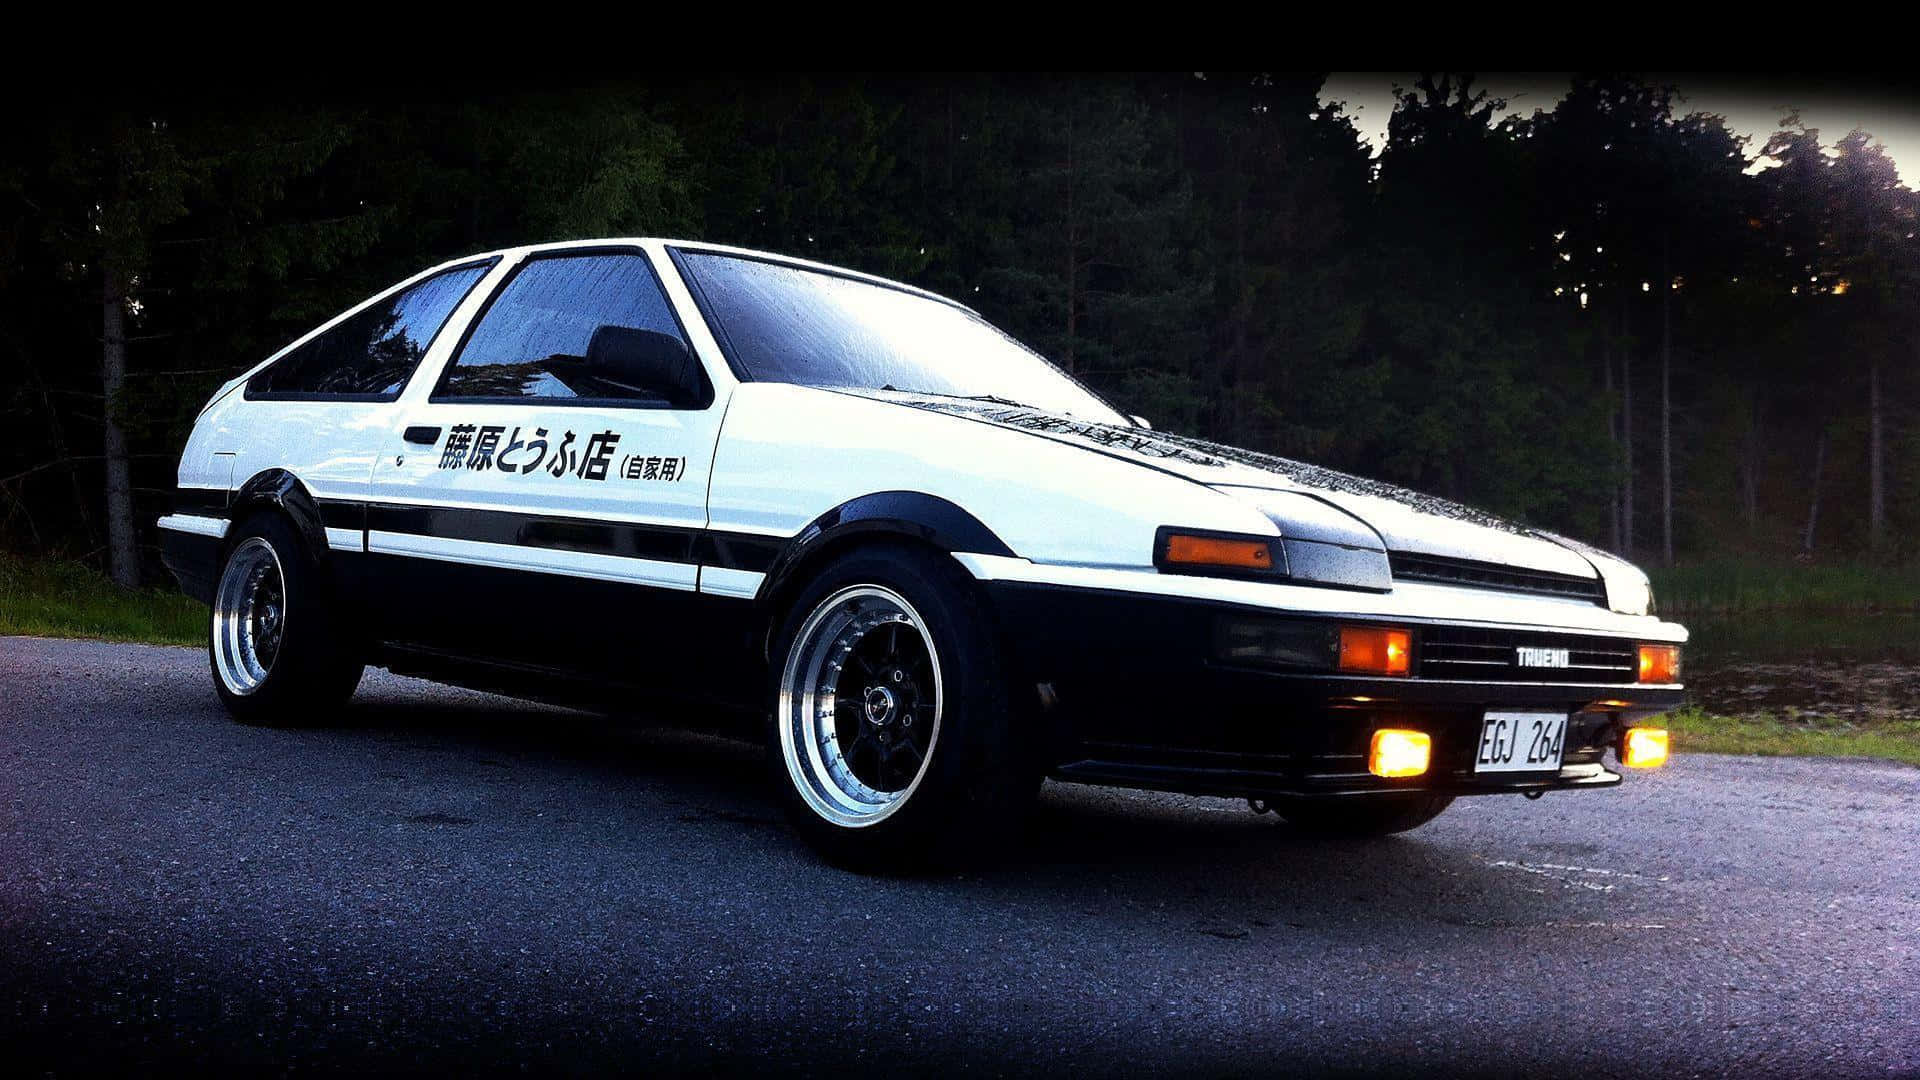 An iconic Toyota AE86 at the drift track Wallpaper